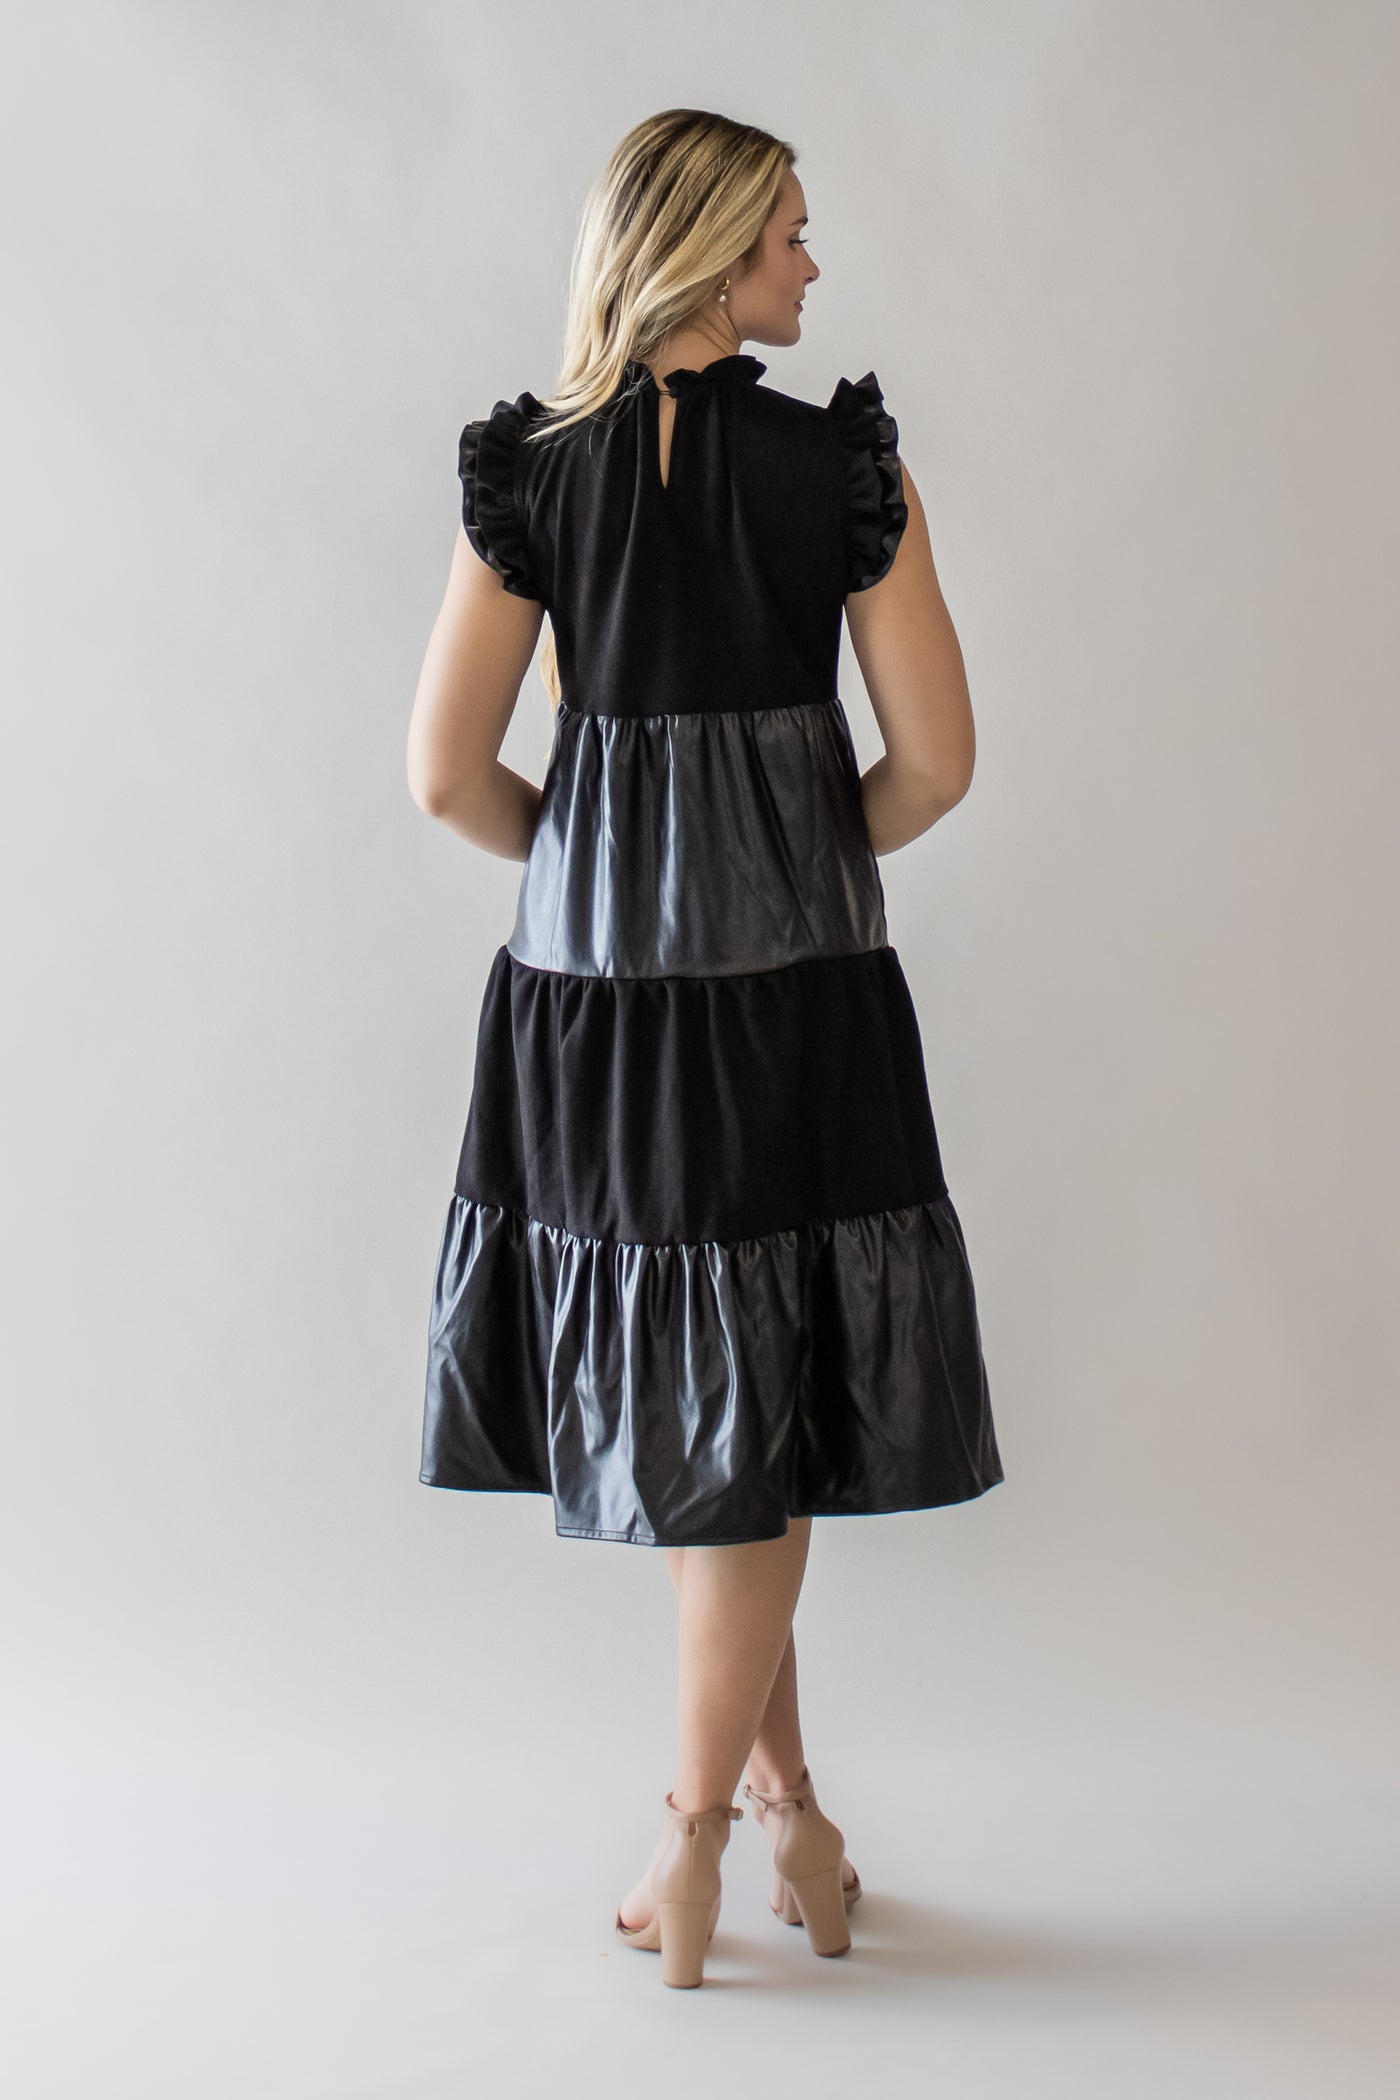 This is a black modest dress with pleather and fabric as well as a mock neck.